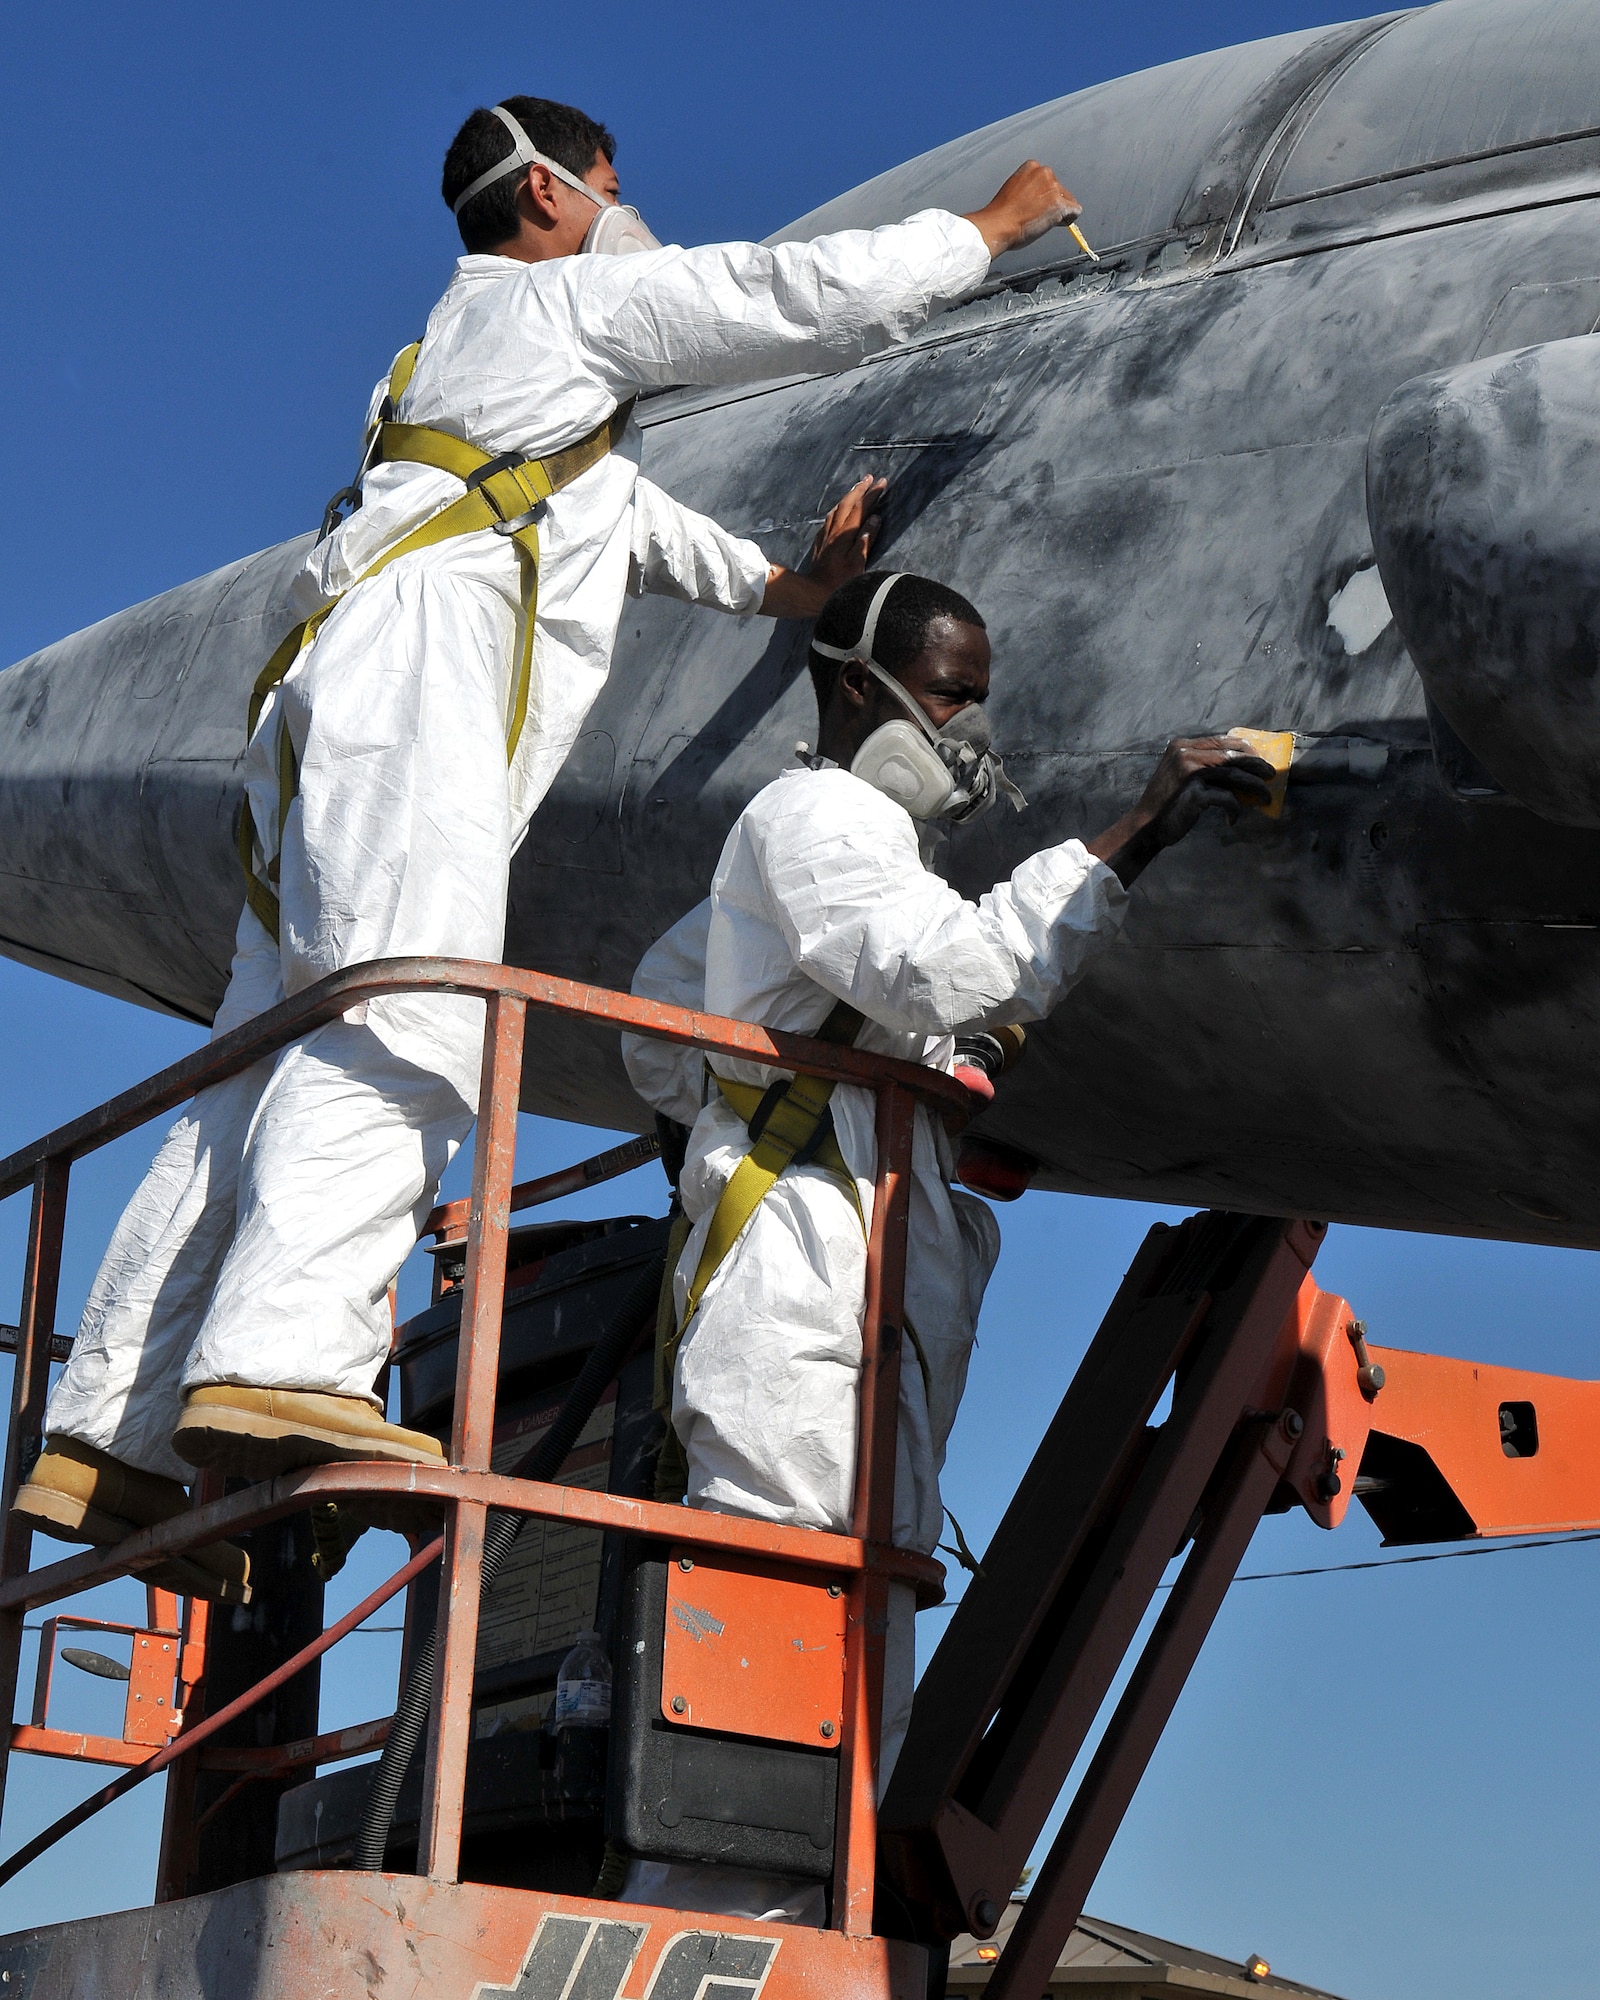 Employees of a Texas based company smooth putty onto imperfections before applying primer to a T-38 Talon static display at Beale Air Force Base, Calif., Oct. 14, 2012. The T-38 Talon is a twin engine supersonic jet trainer aircraft used at Beale to train U-2 Dragon lady pilots. (U.S. Air Force photo by Senior Airman Rebeccah Anderson/Released)